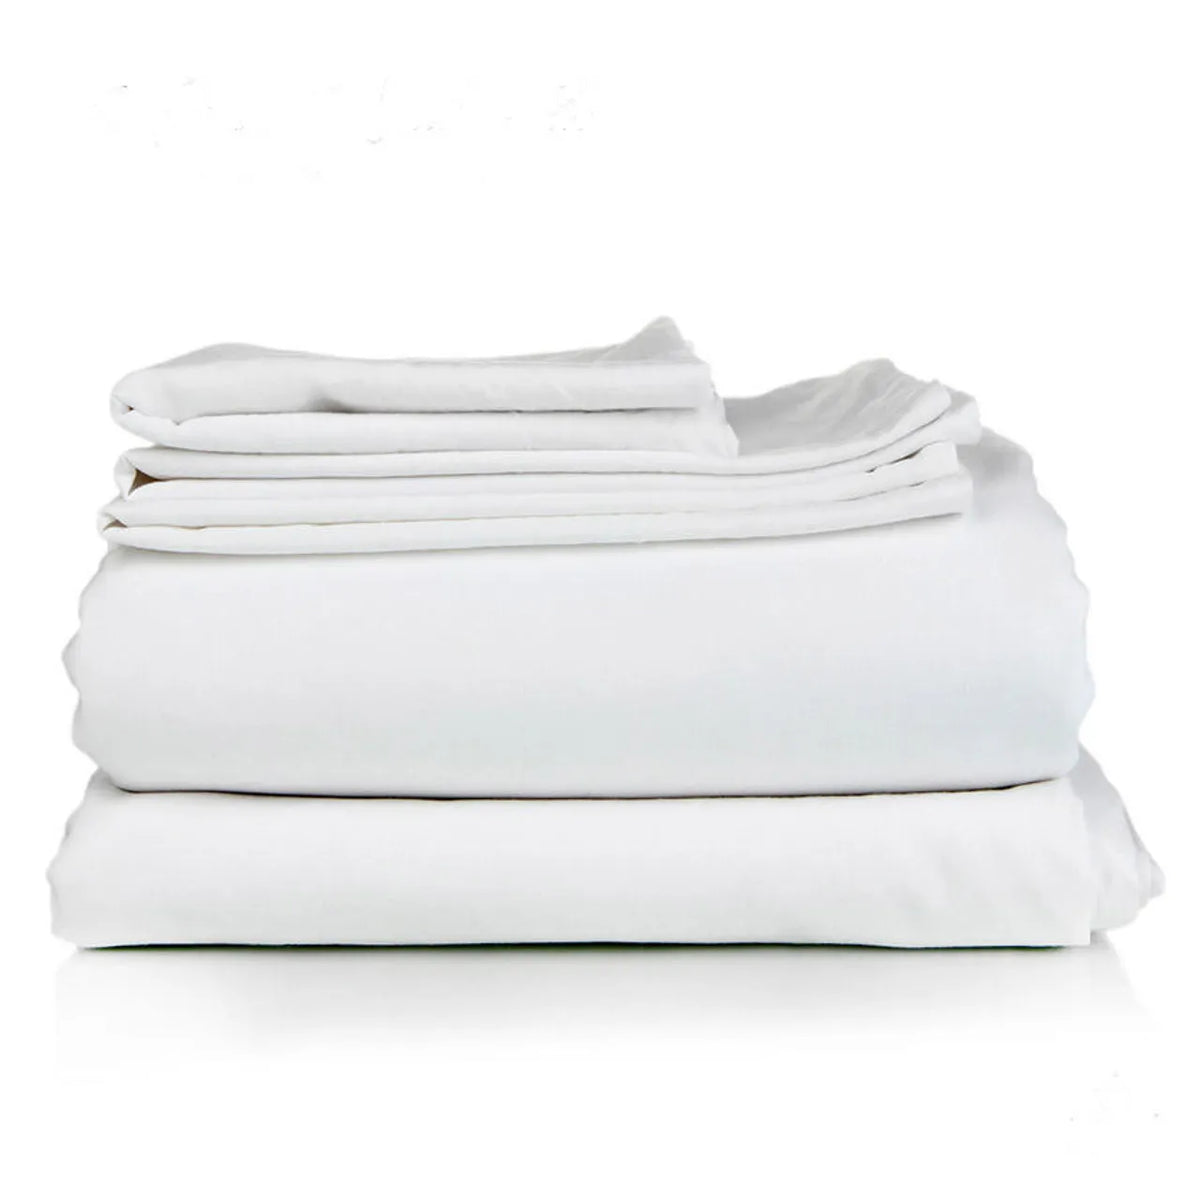 Flat Sheets - Oxford Super Deluxe Bed Linen